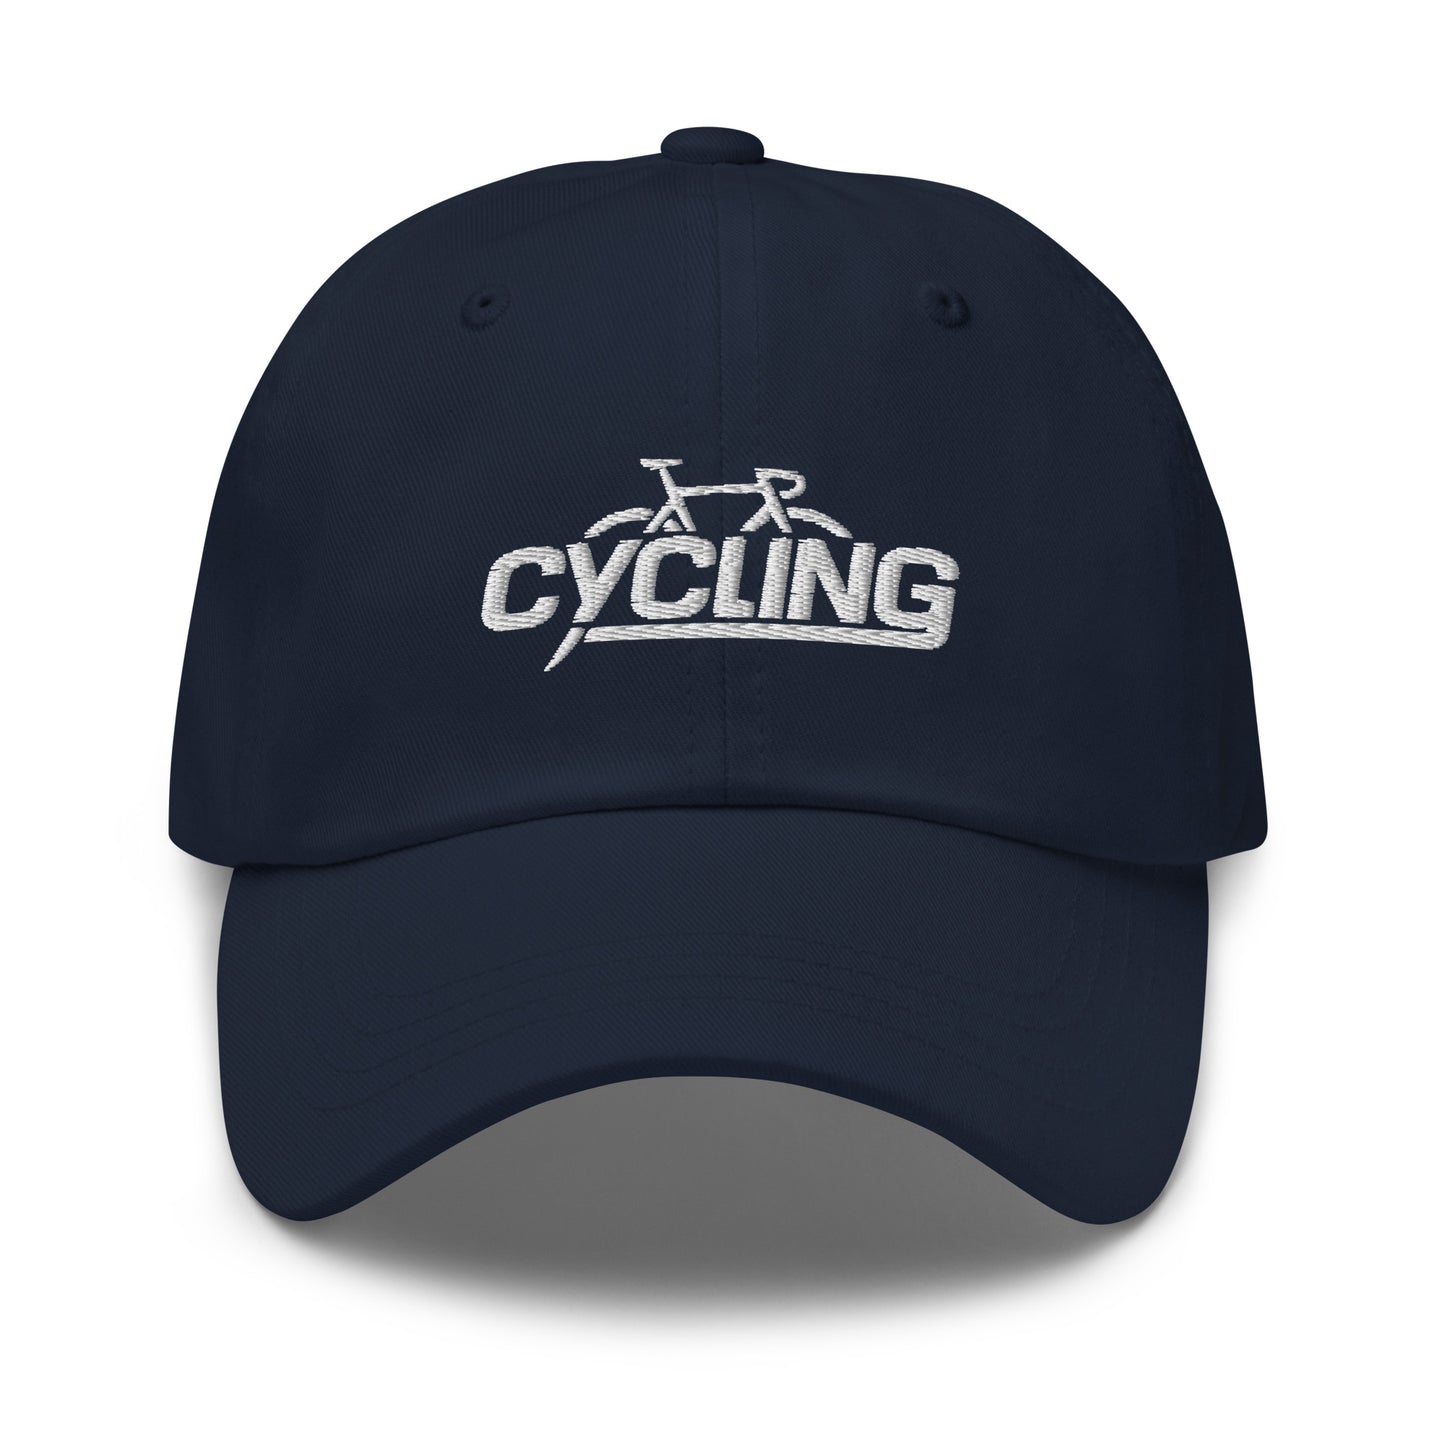 Cycling hat, Bicycle hat, bike hat, cycle hat Navy